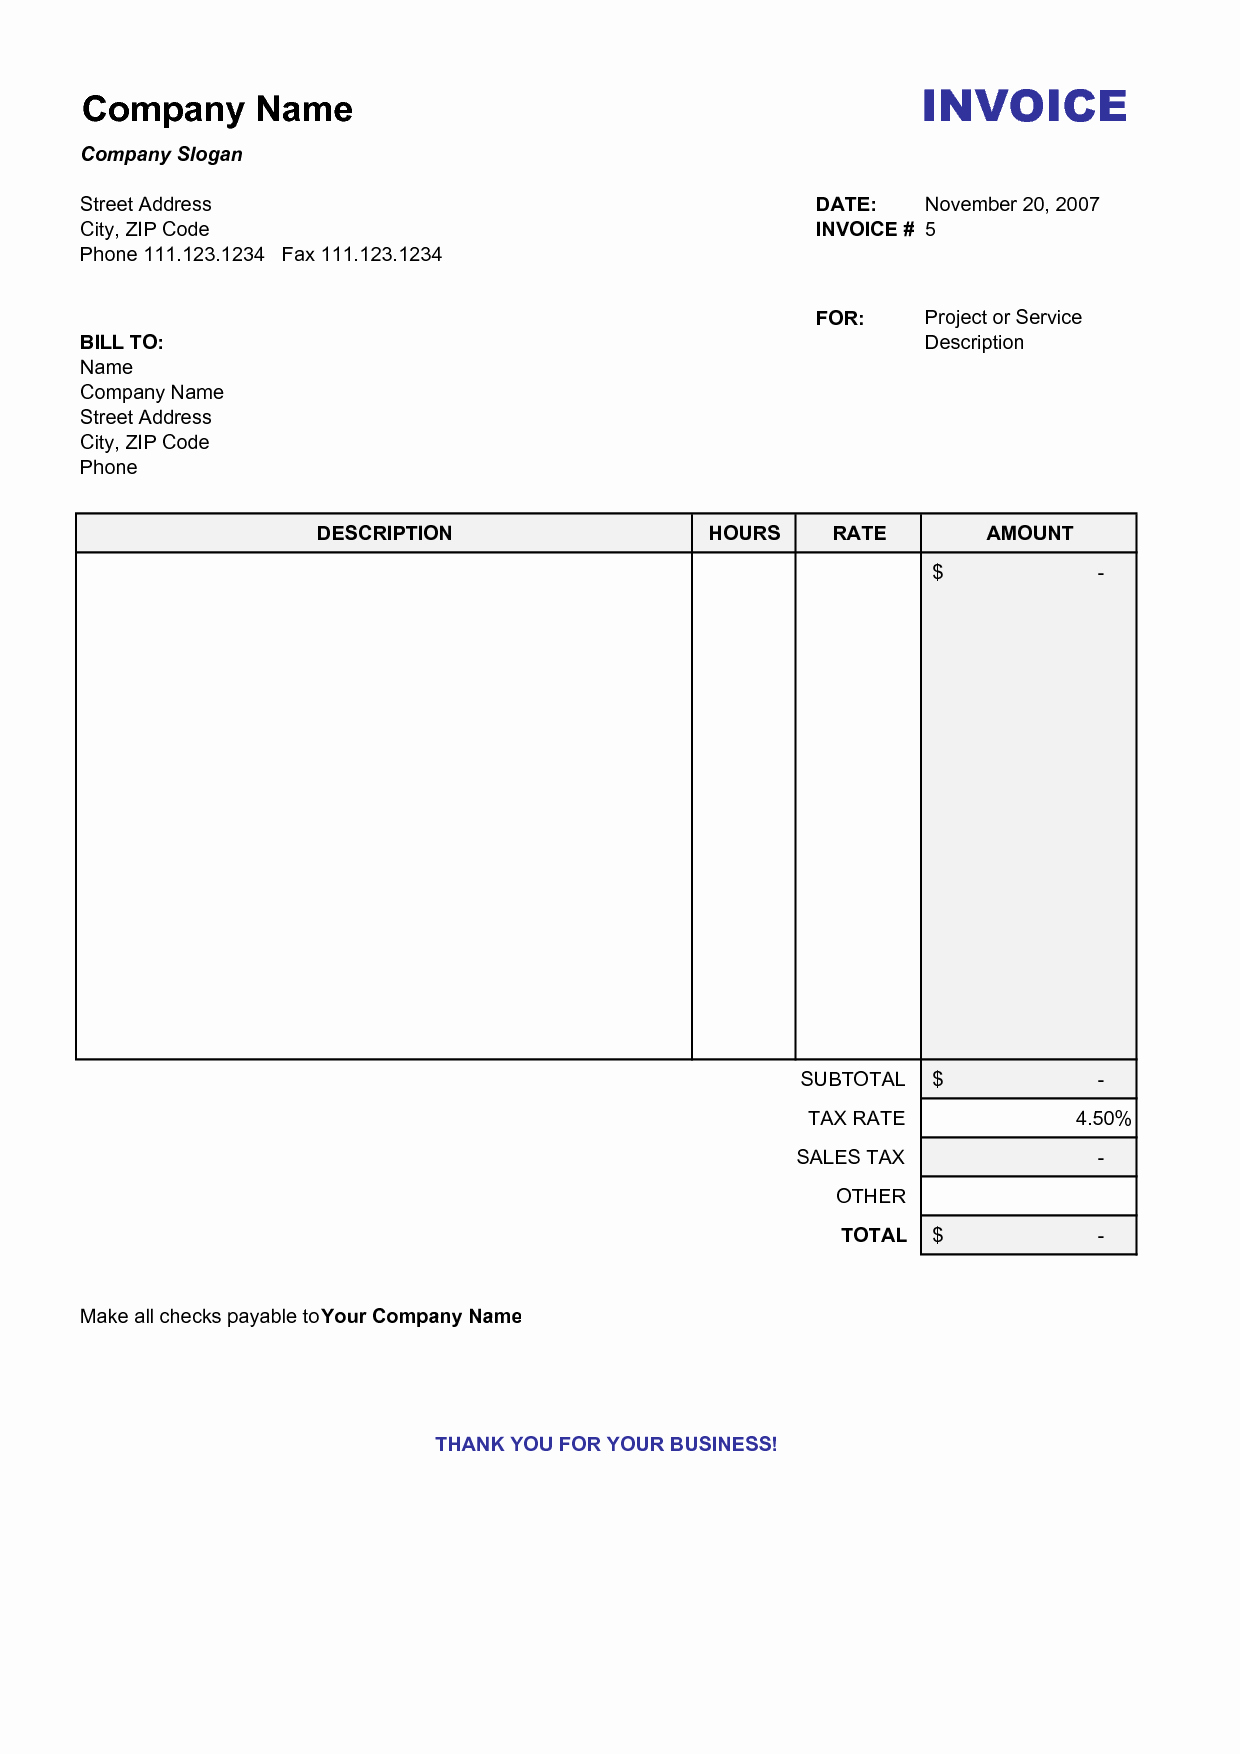 Free Fillable Invoice Template Then Best S Of Blank Invoice To Use within Fillable Invoice Template Pdf